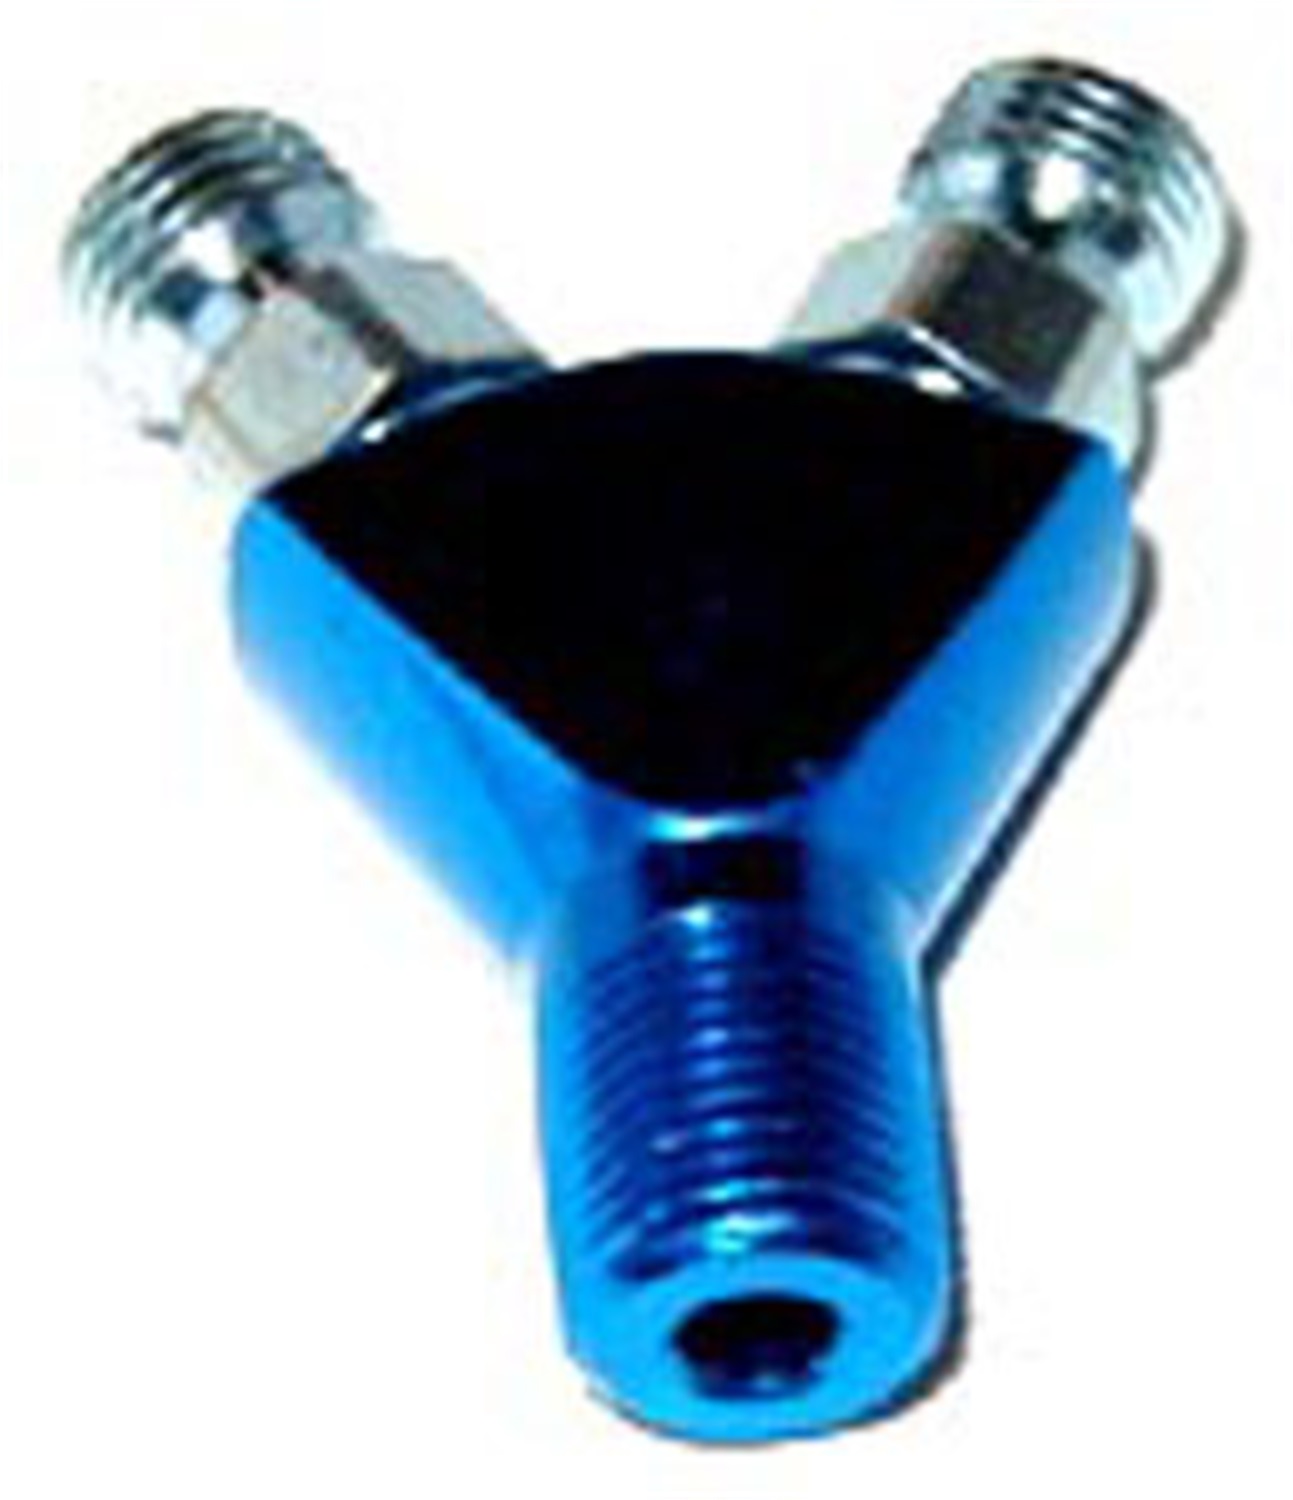 Fuel Hose Fitting, NOS Fittings NOS, FLARE JET Y FITTING(BLUE)